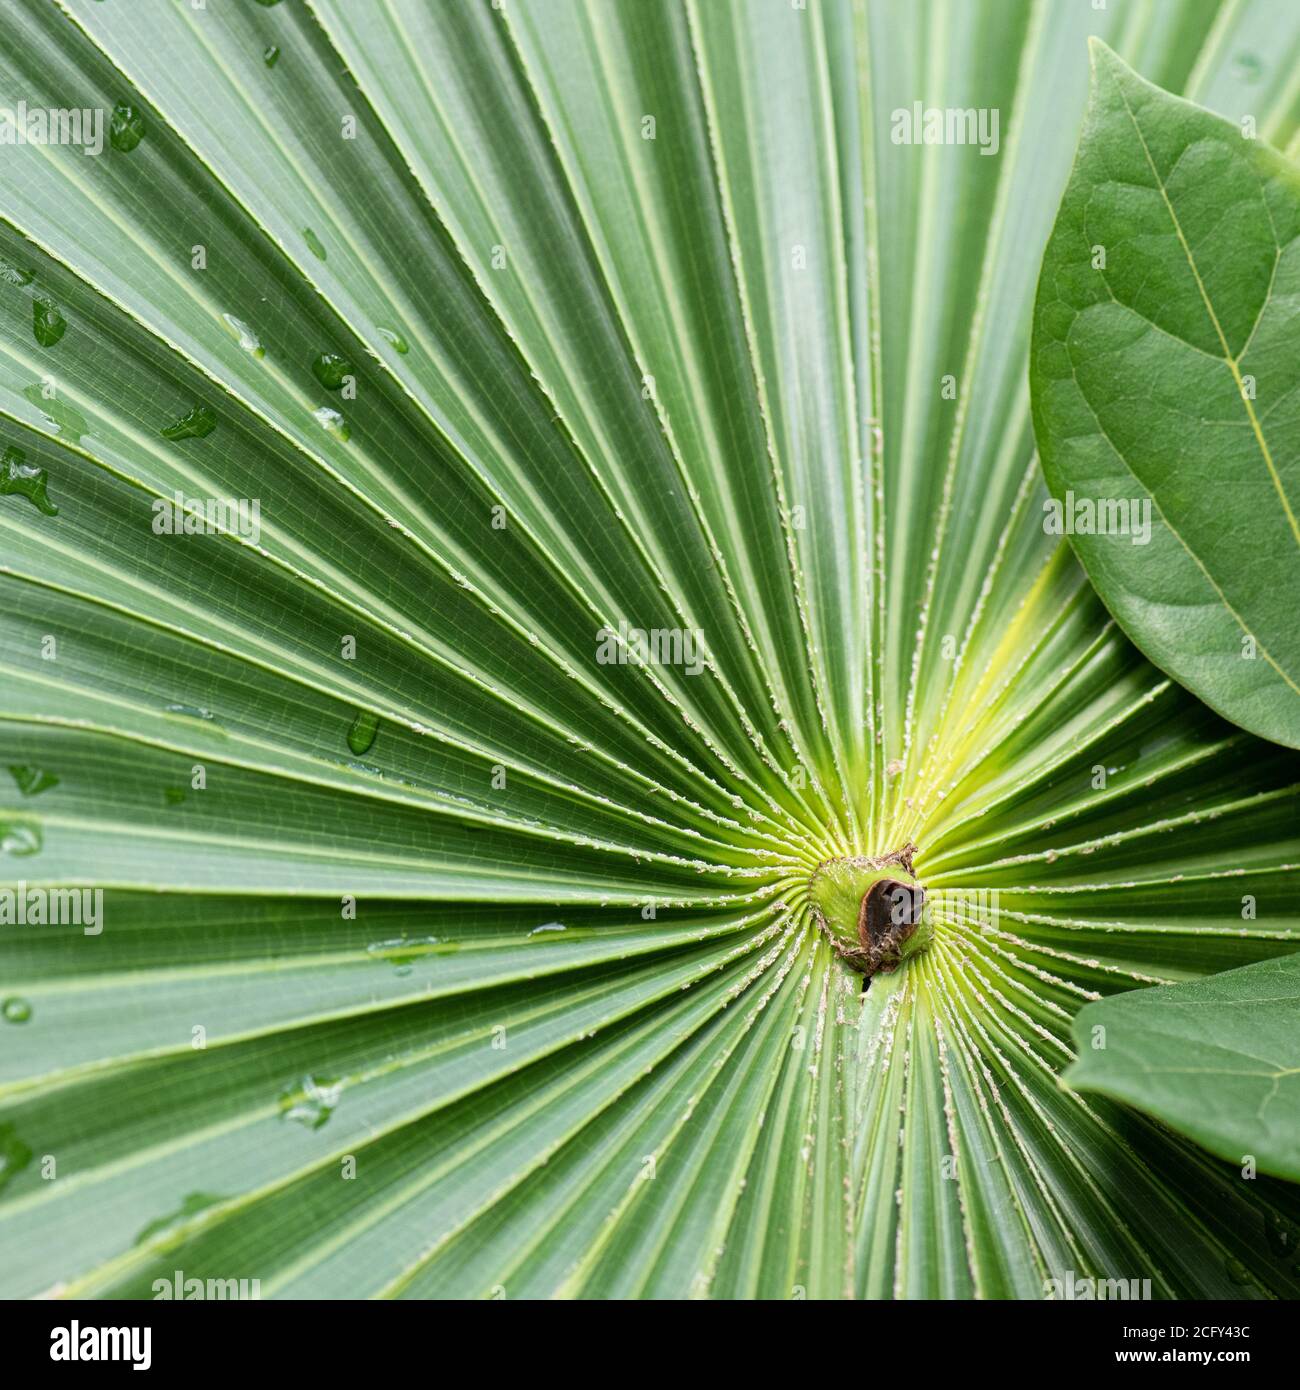 Closeup of the livistona, australis plant commonly known as the Austrialian Cabbage Plant Stock Photo